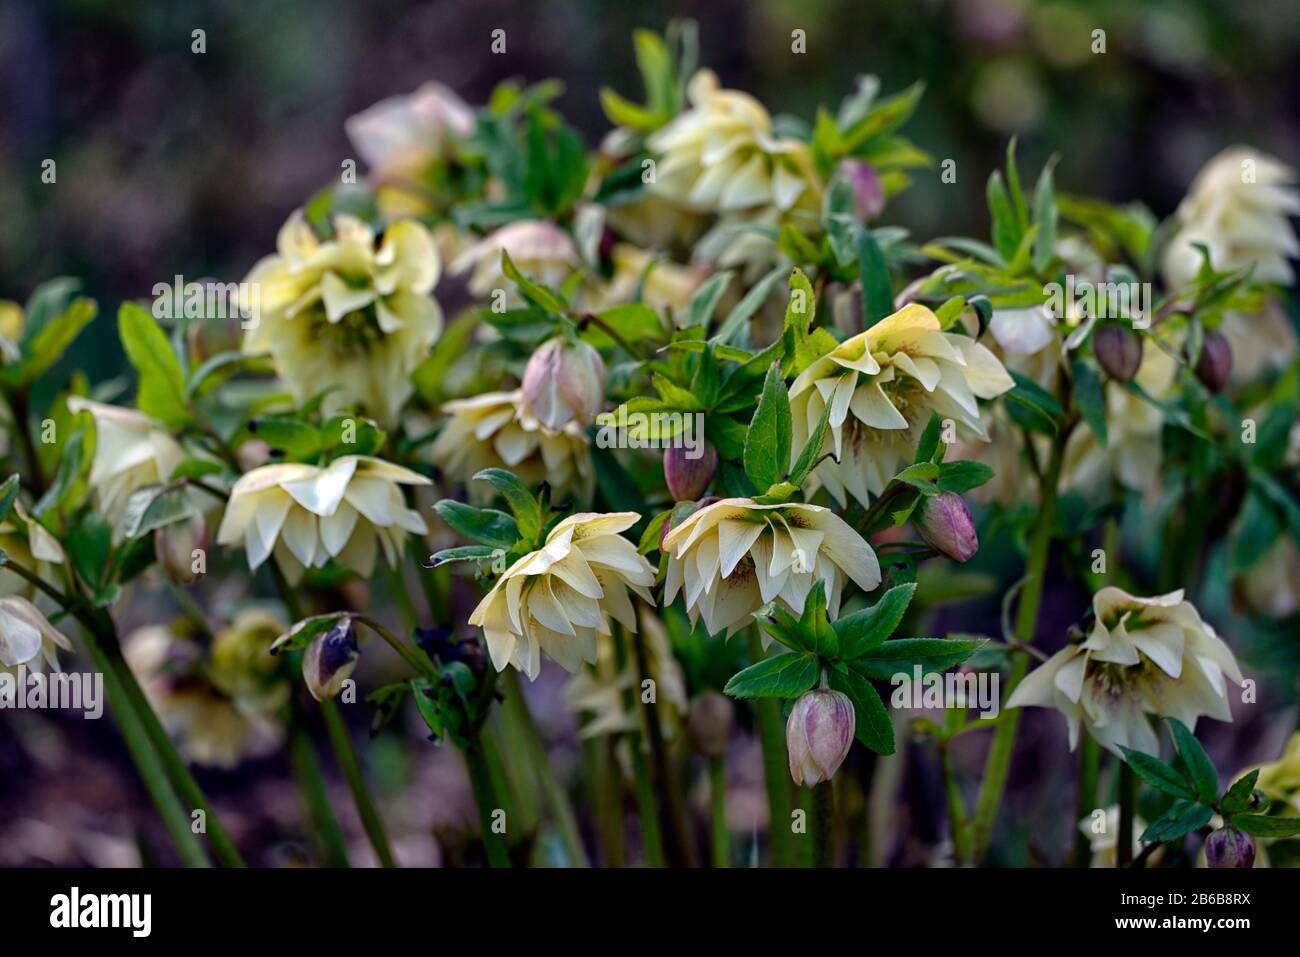 Helleborus × hybridus,Hellebore,Hellebores,helleborus,double flowers,double flowered,cream yellow flowers,colour,color,hybrid,hybrids,spring,flower,fl Stock Photo